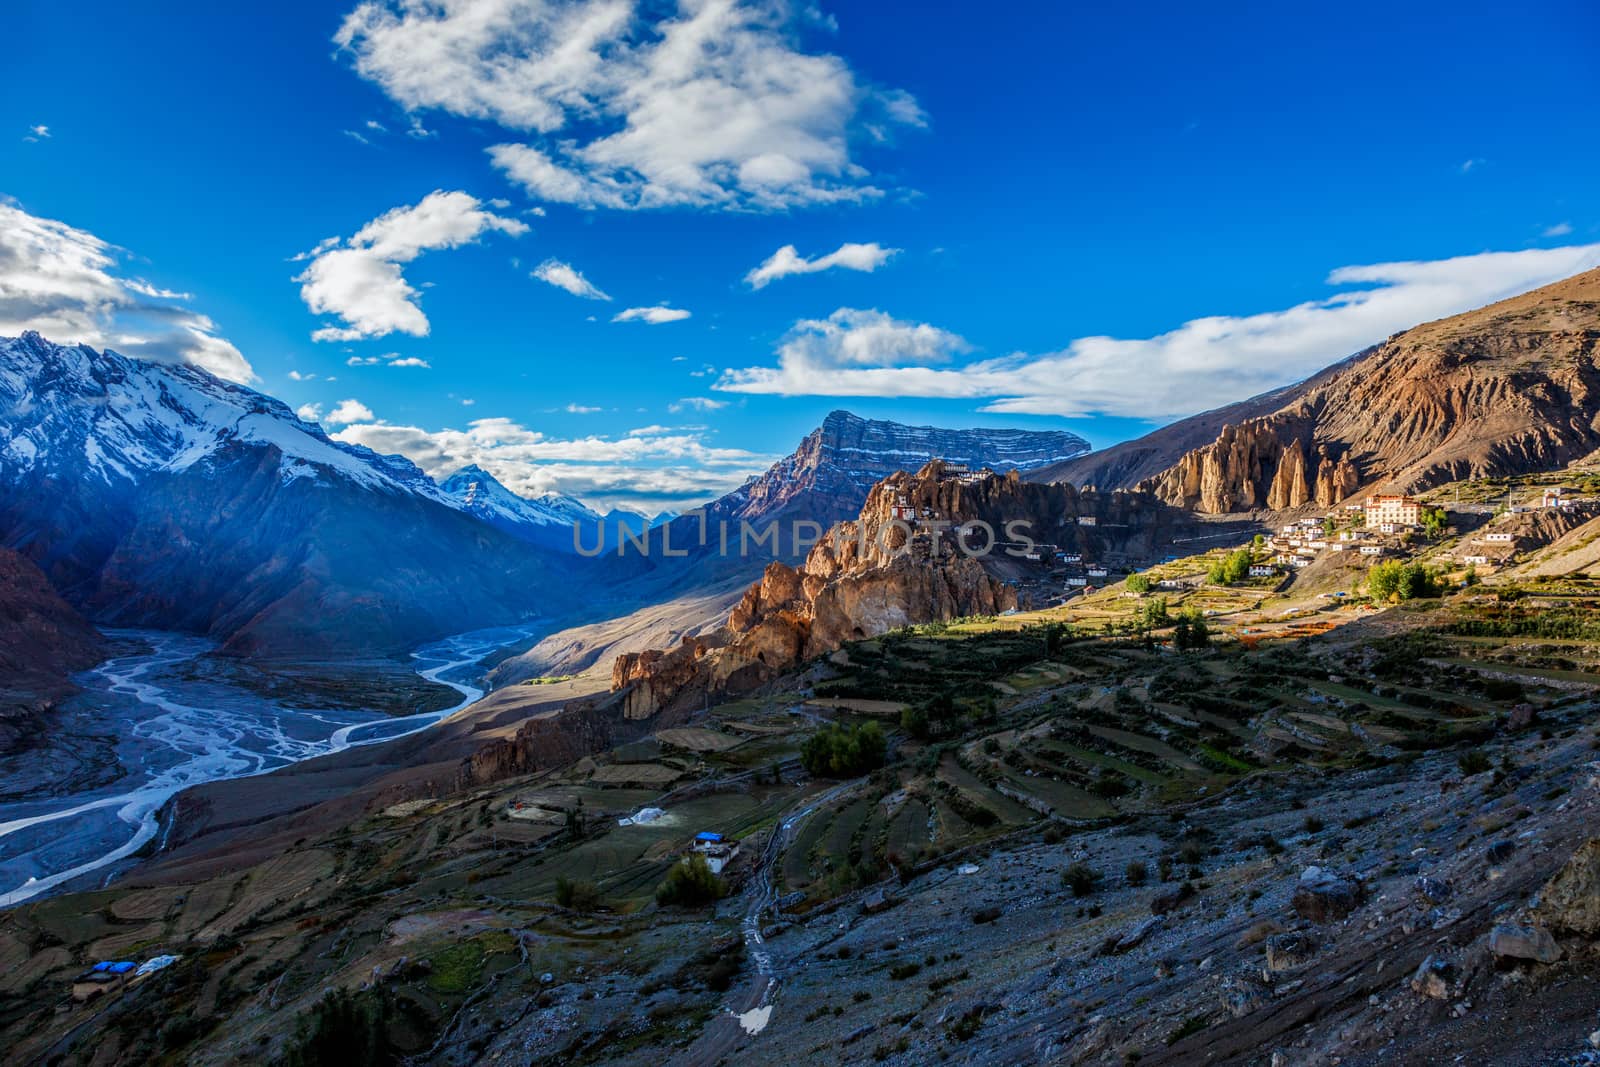 Dhankar monastry perched on a cliff in Himalayas and Spiti valley on sunset. Dhankar, Spiti Valley, Himachal Pradesh, India